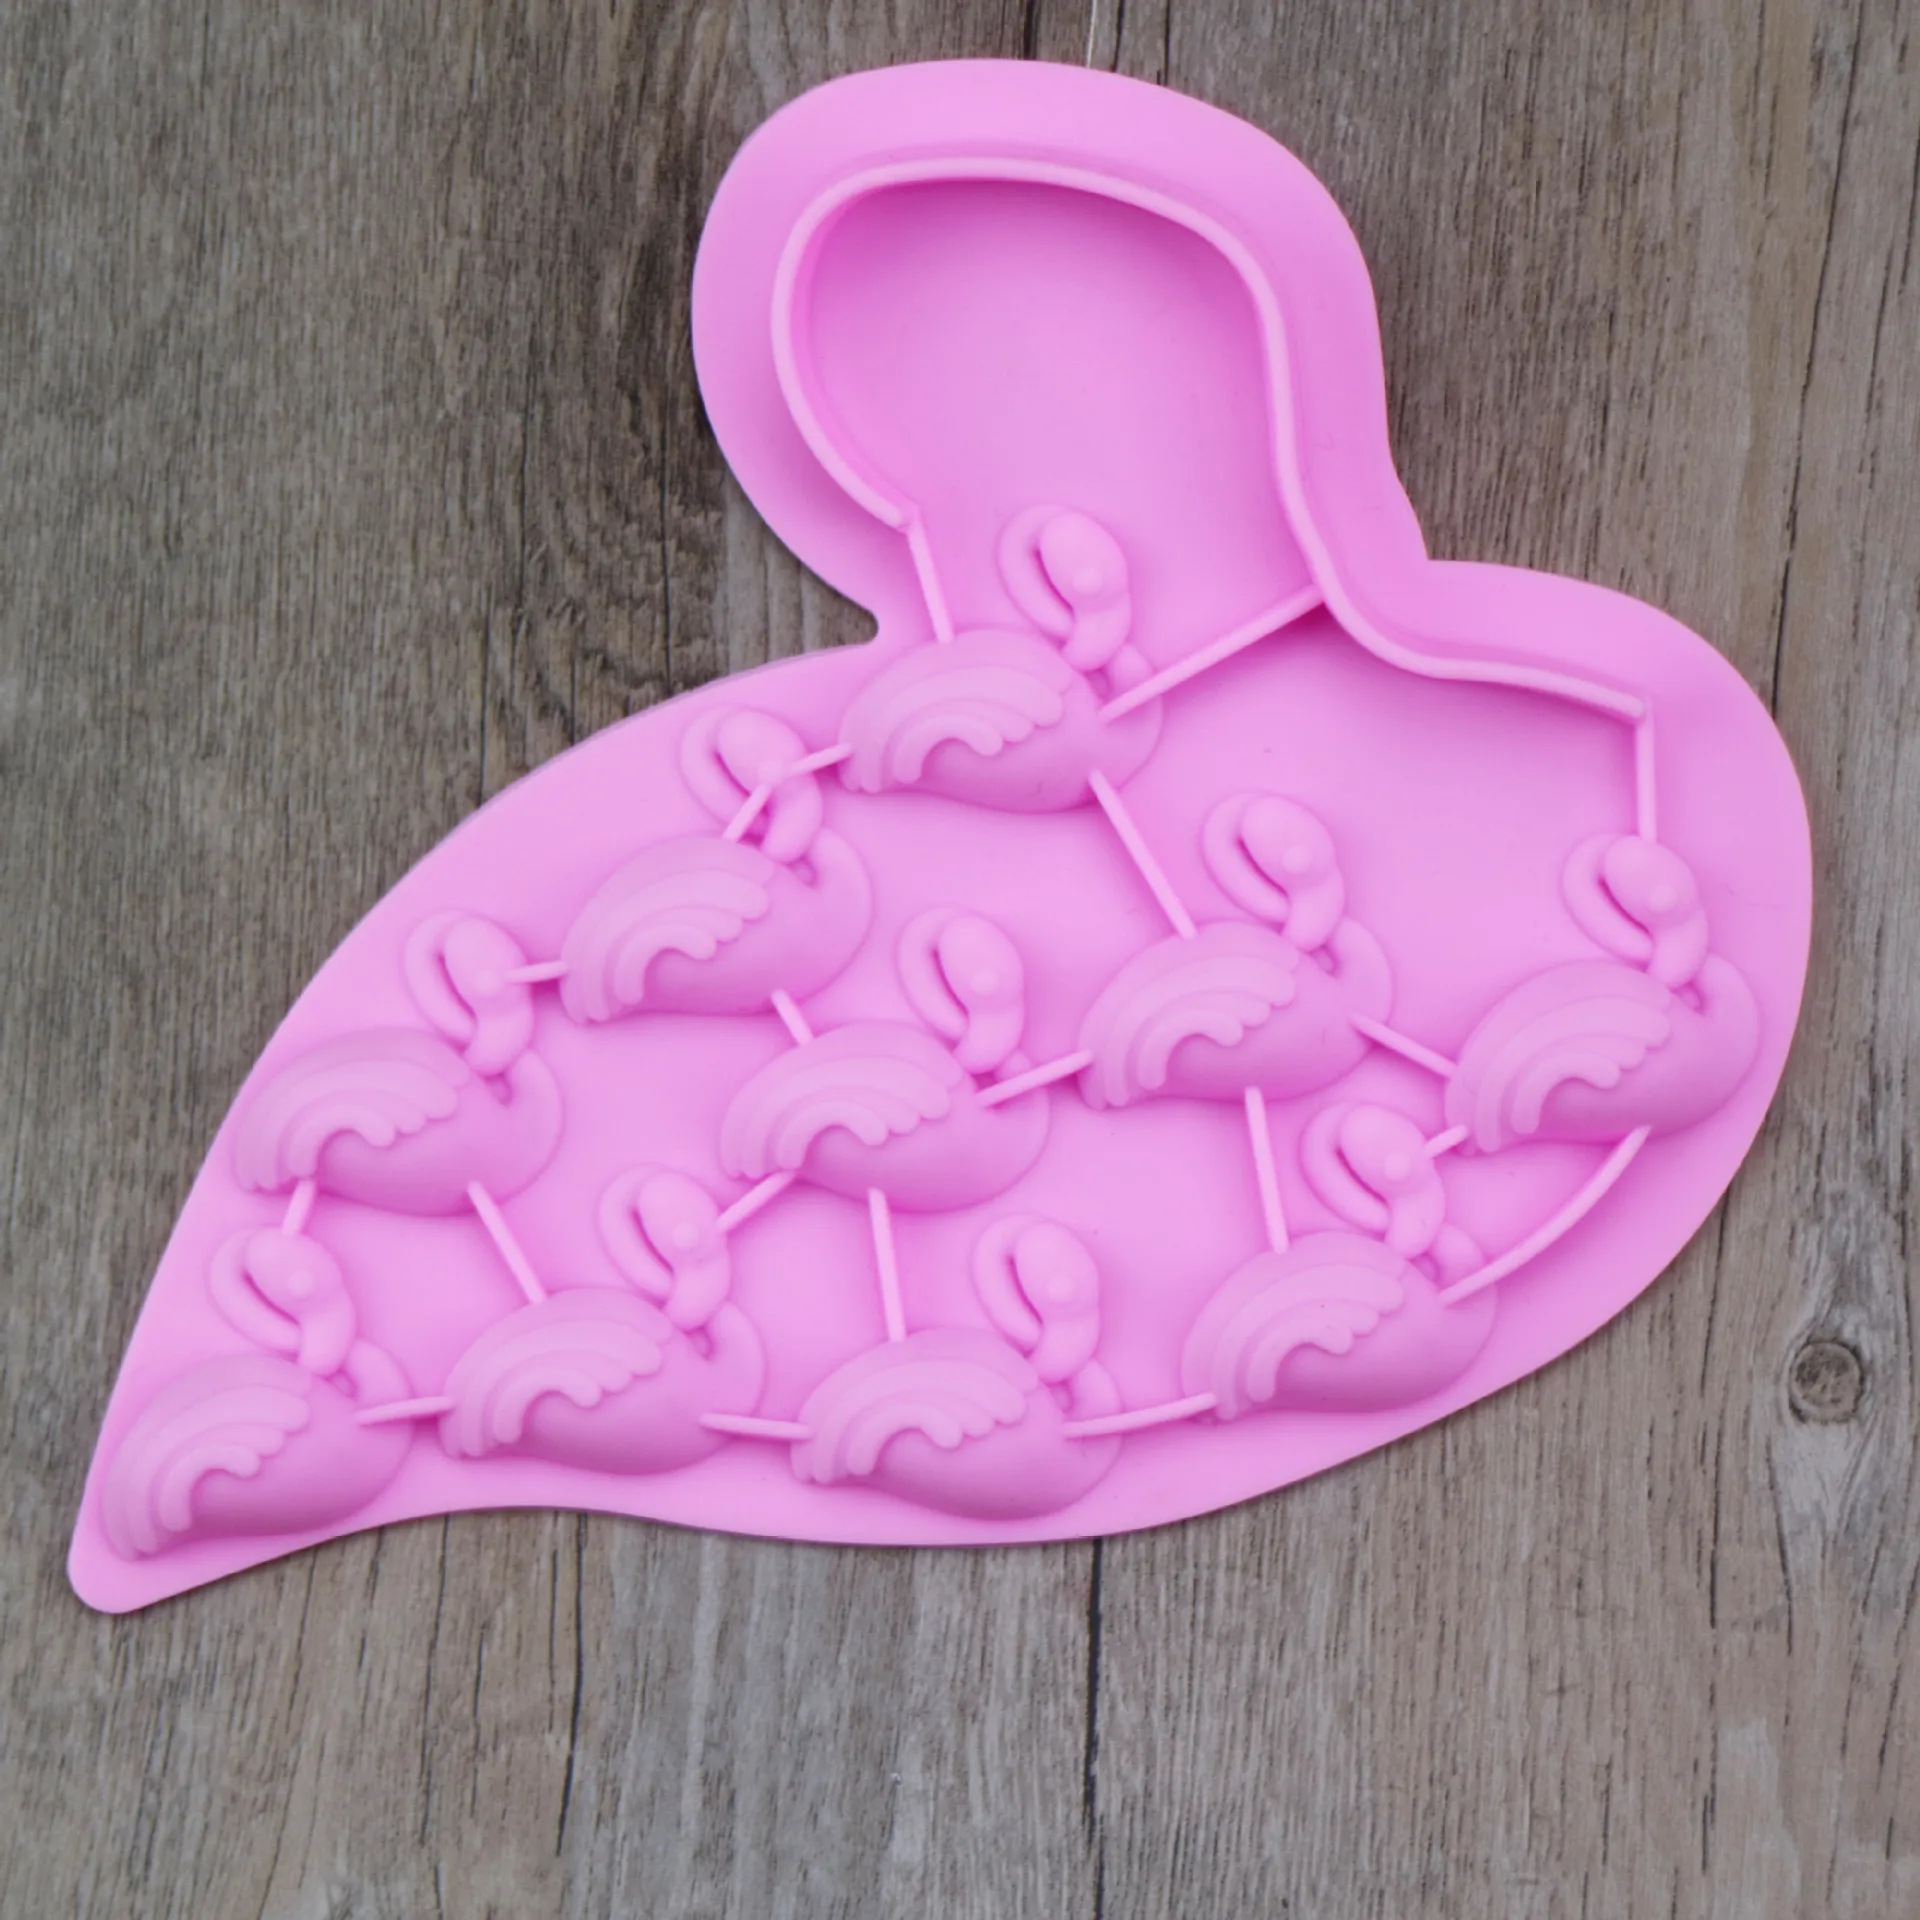 

3D Flamingo Baby Birthday DIY Party Fondant Cake Decorating Turtle Leaf Silicone Molds Cupcake Chocolate Gumpaste Candy Moulds